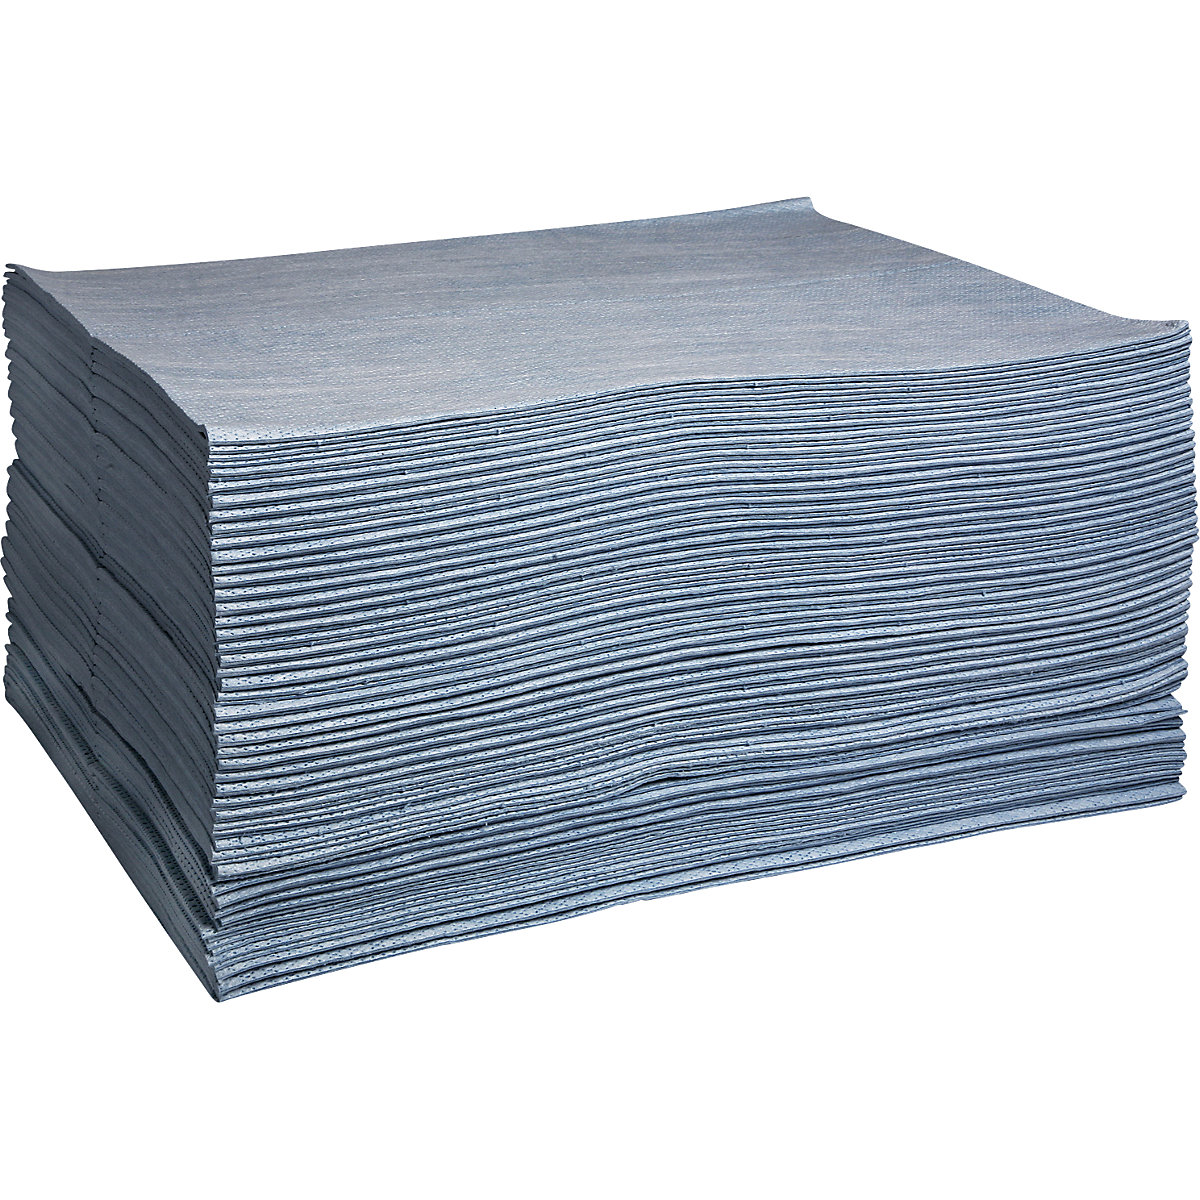 PRO absorbent sheeting